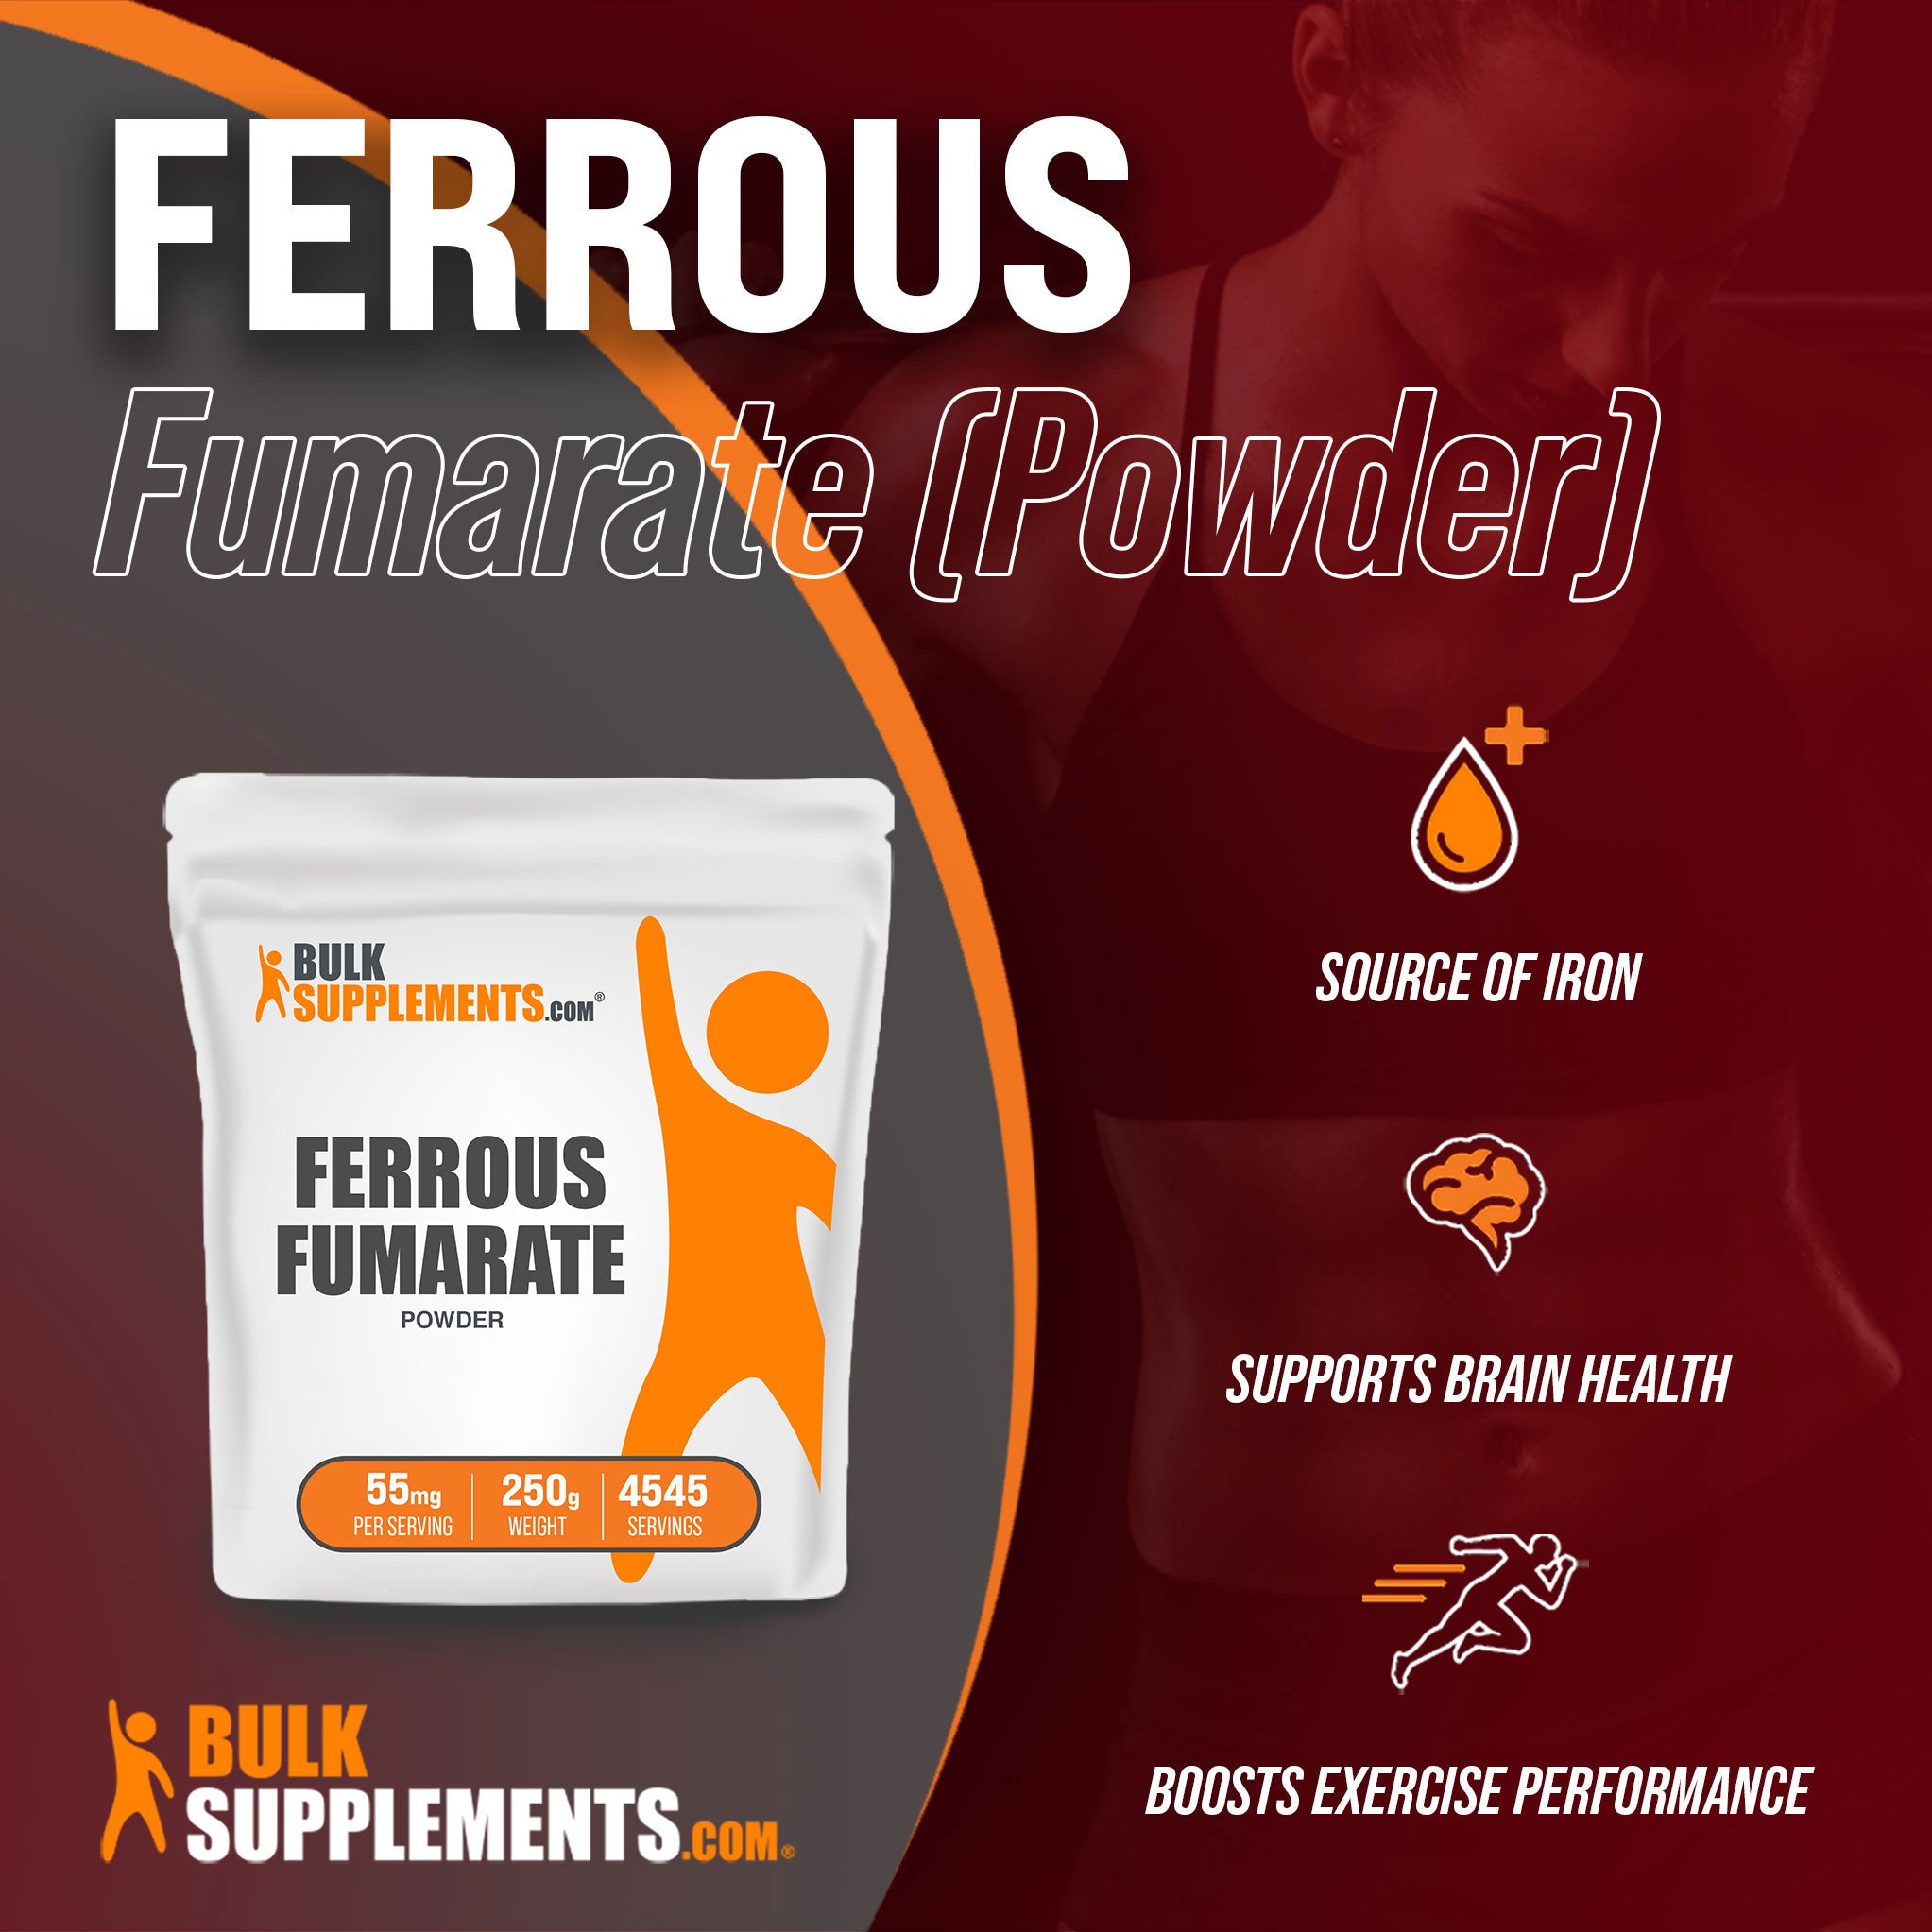 Benefits of Ferrous Fumarate; source of iron, supports brain health, boosts exercise performance